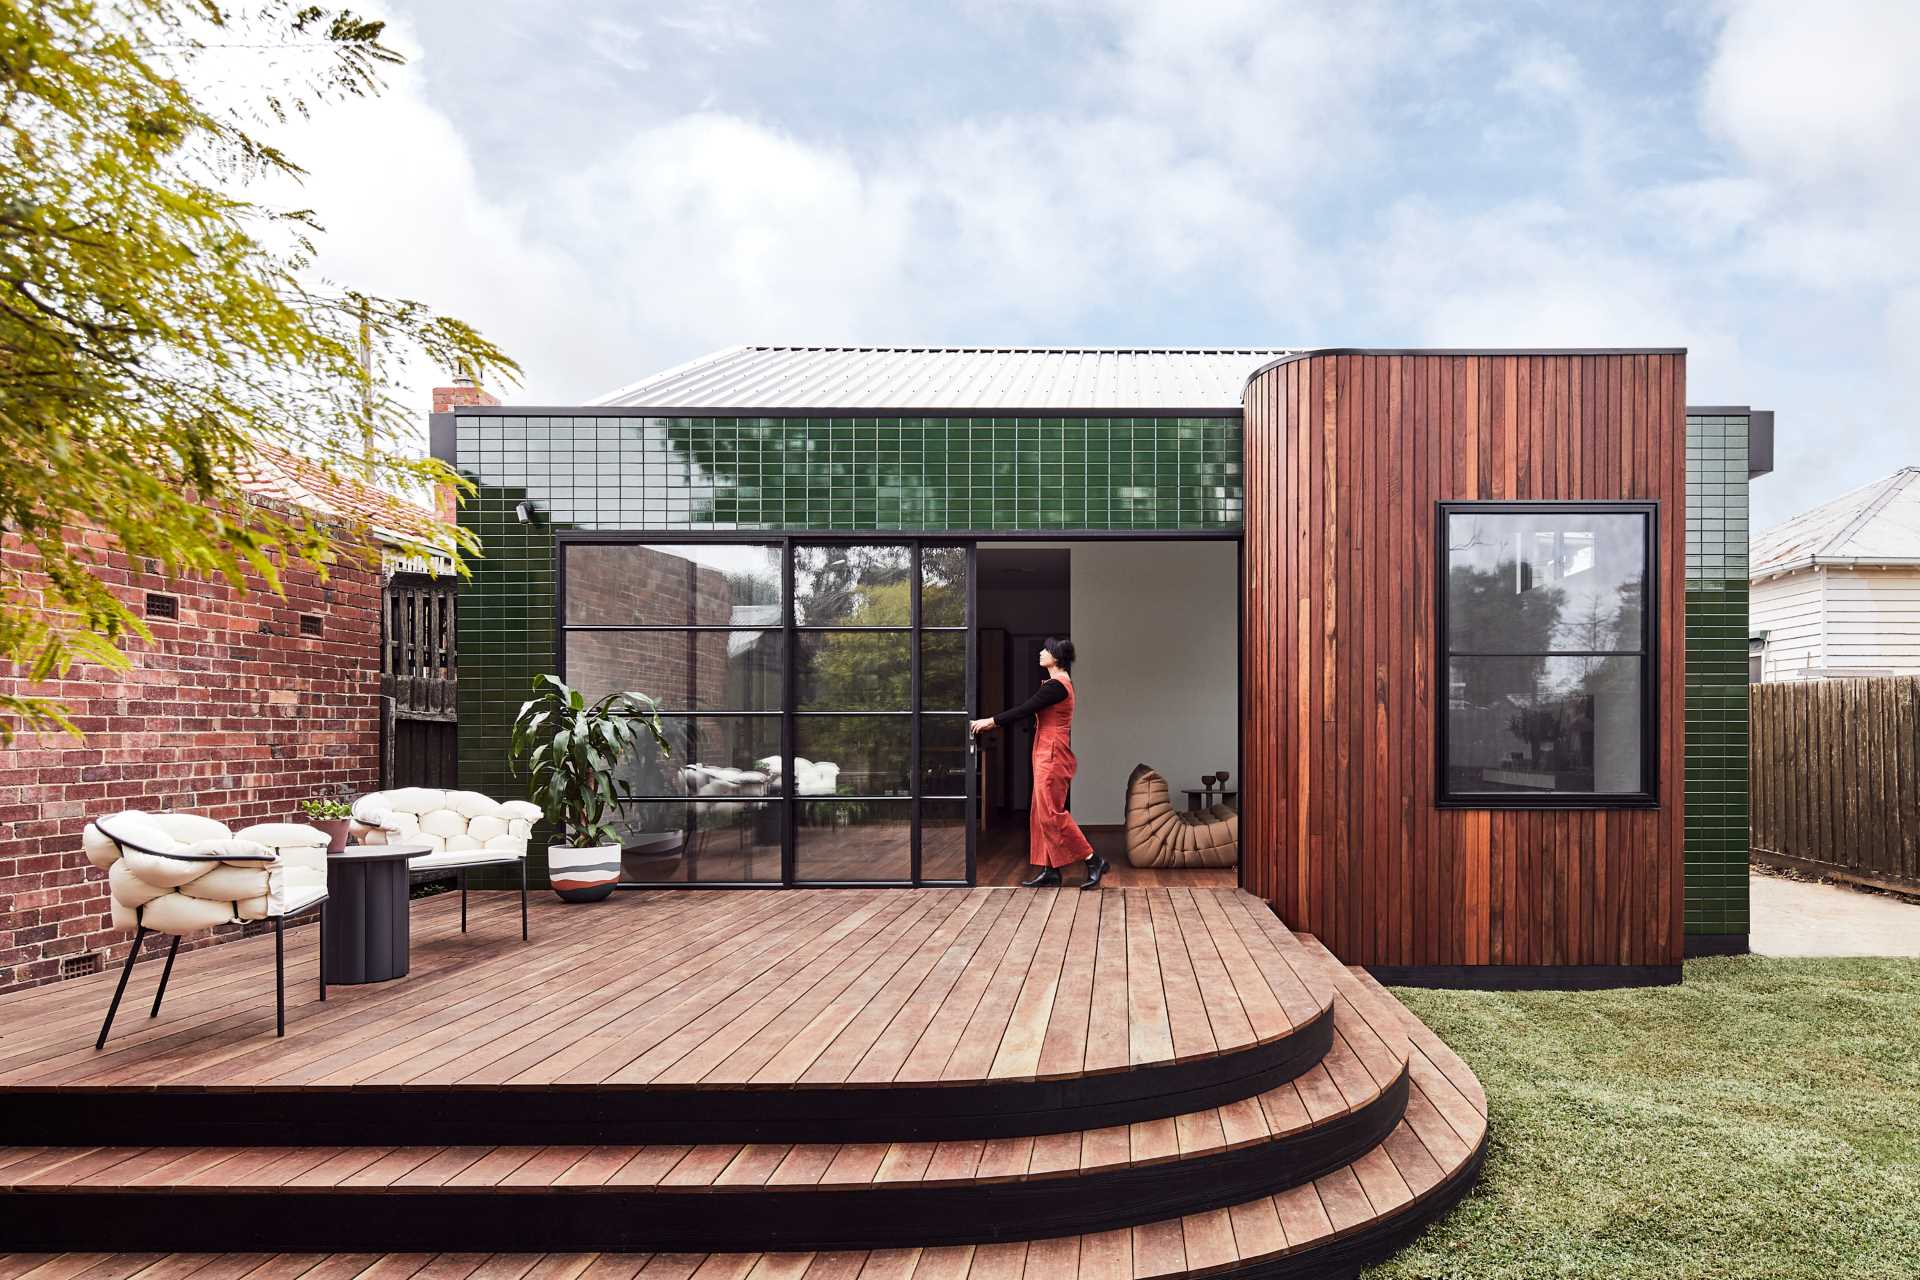 A modern house addition with glazed green tiles and vertical wood siding.